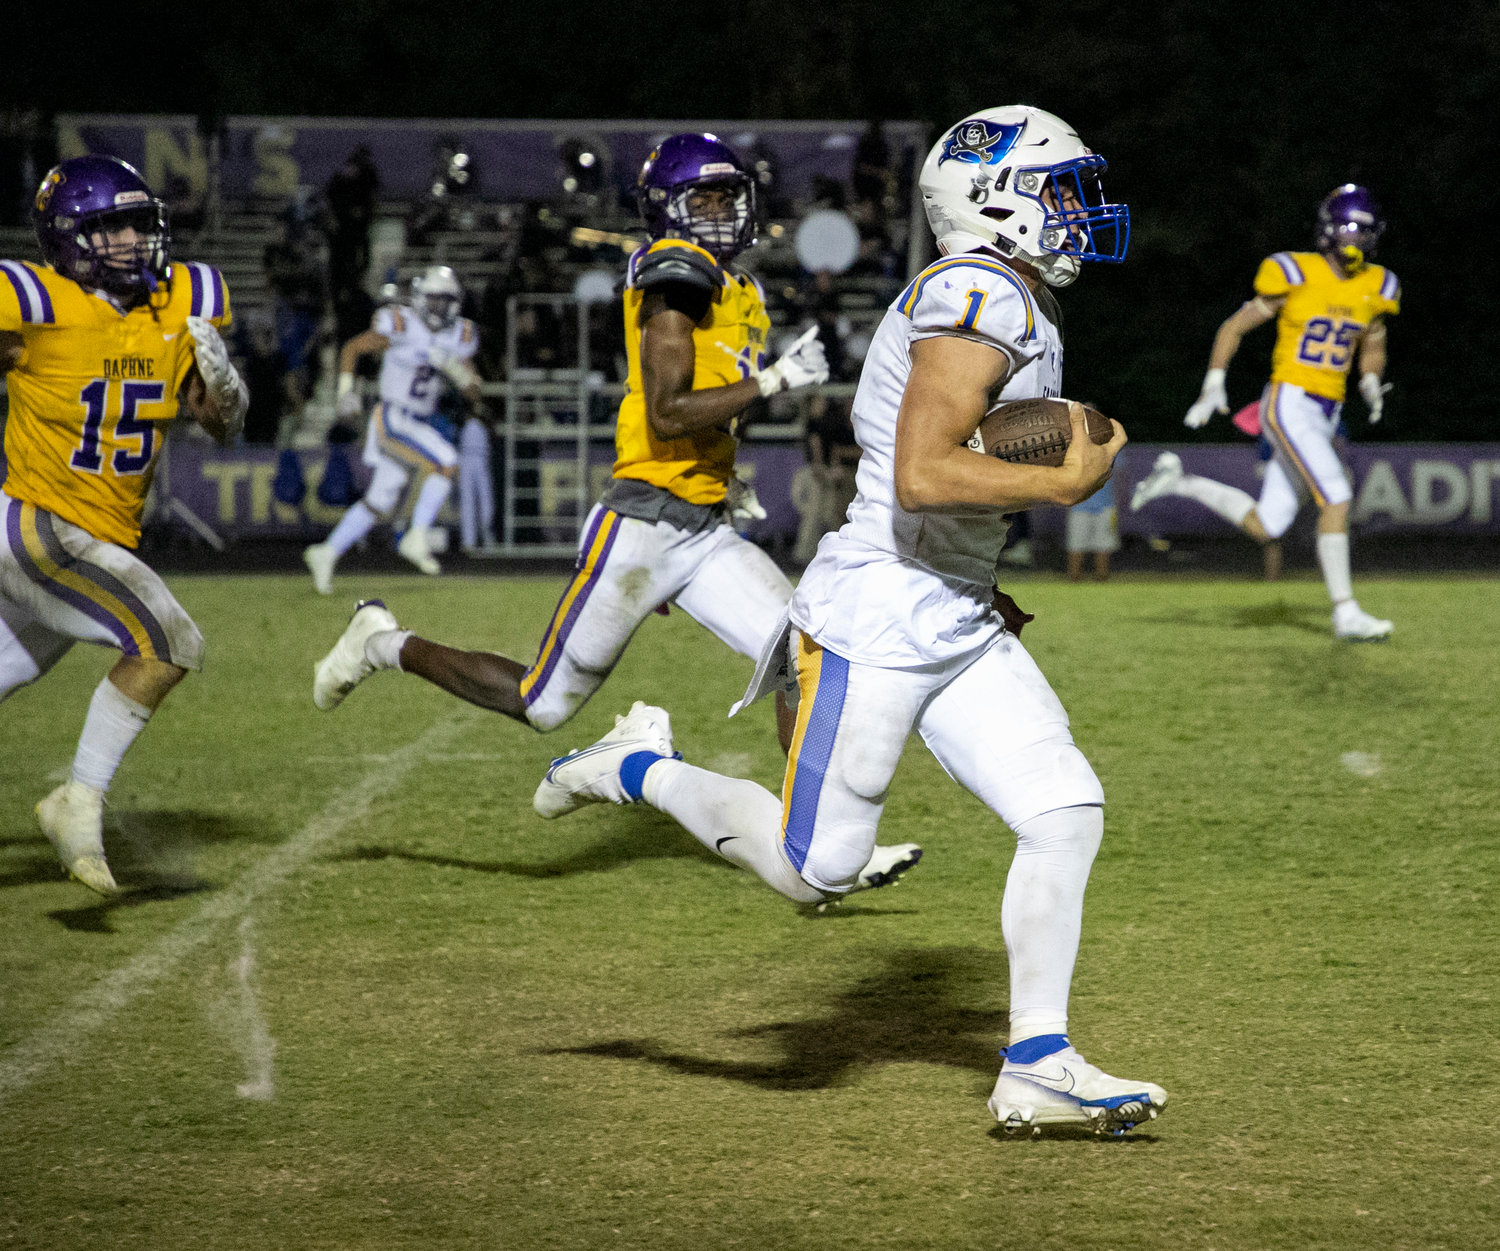 Pirate senior Caden Creel hits the open field on his long touchdown run that helped Fairhope earn a 26-7 road win over the Daphne Trojans at Jubilee Stadium Friday night.